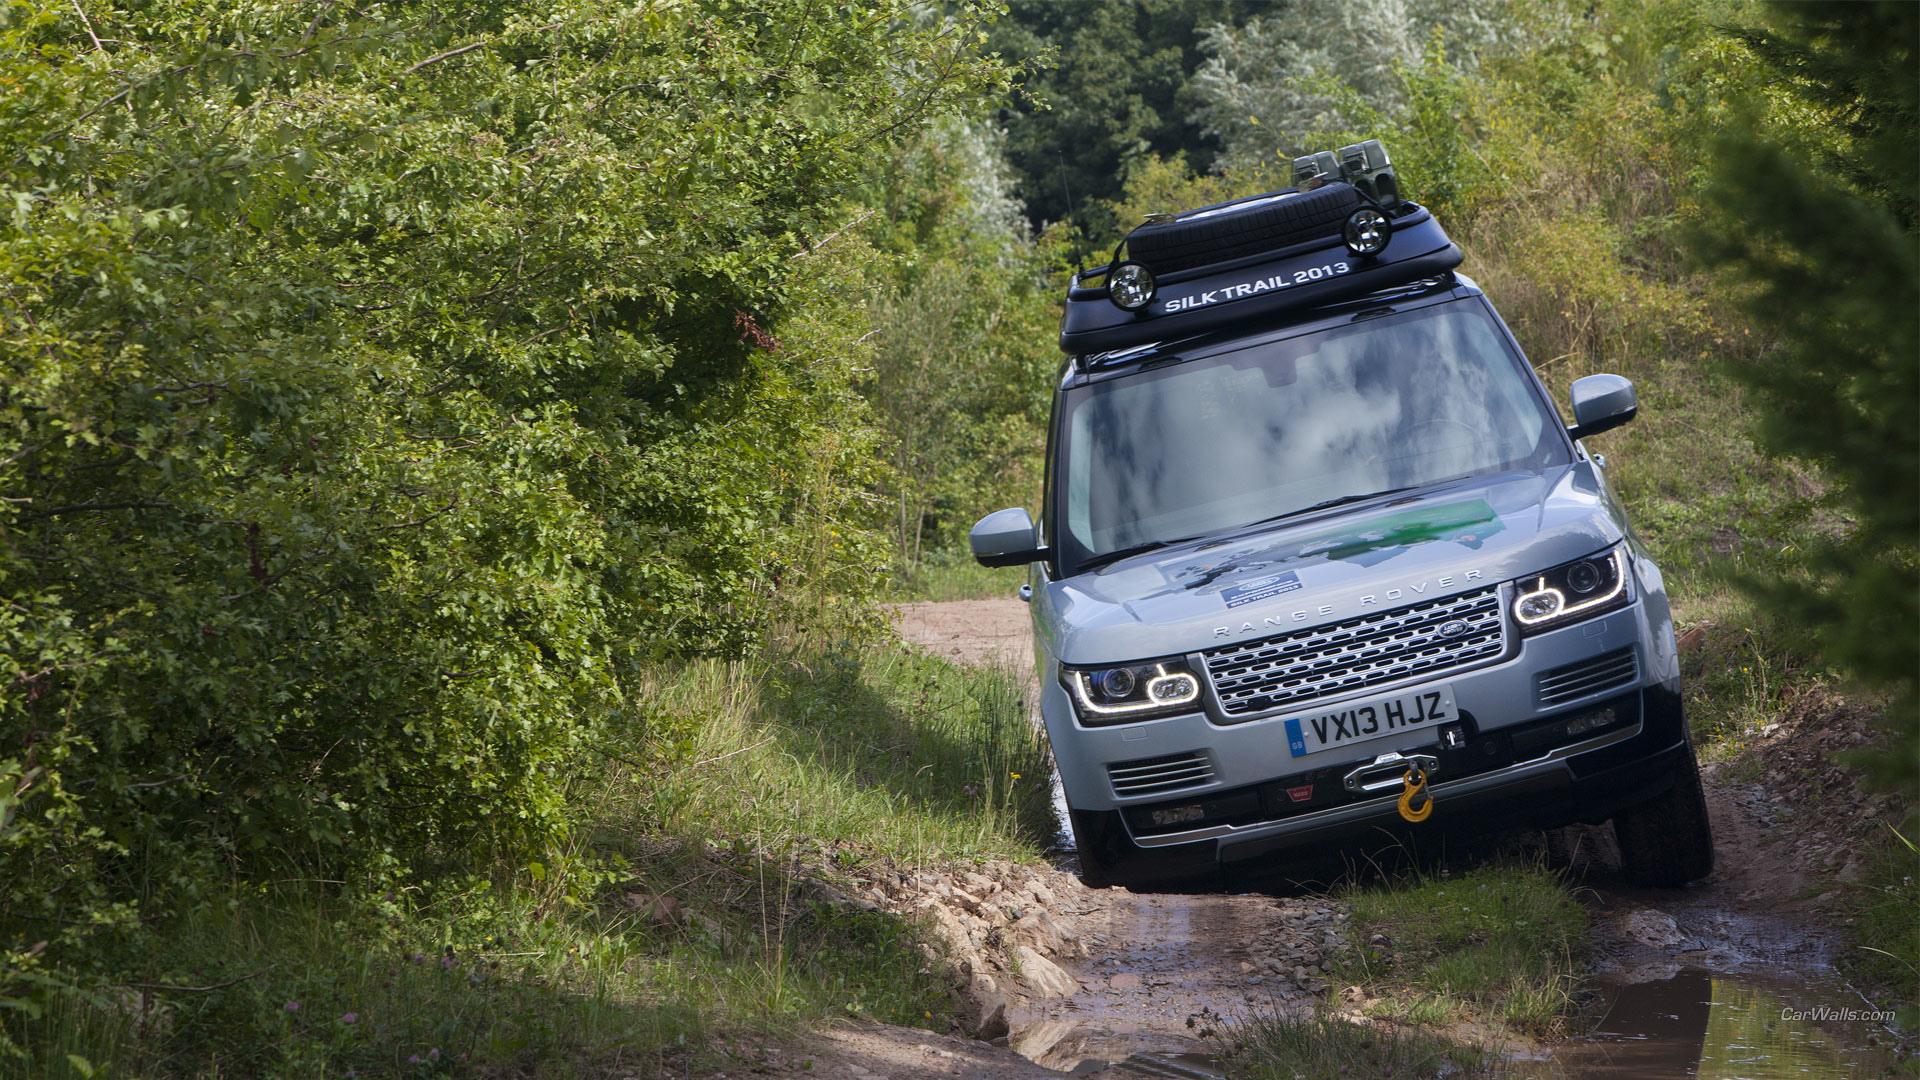 2015 Land Rover Range Rover Hybrid wallpapers HD quality